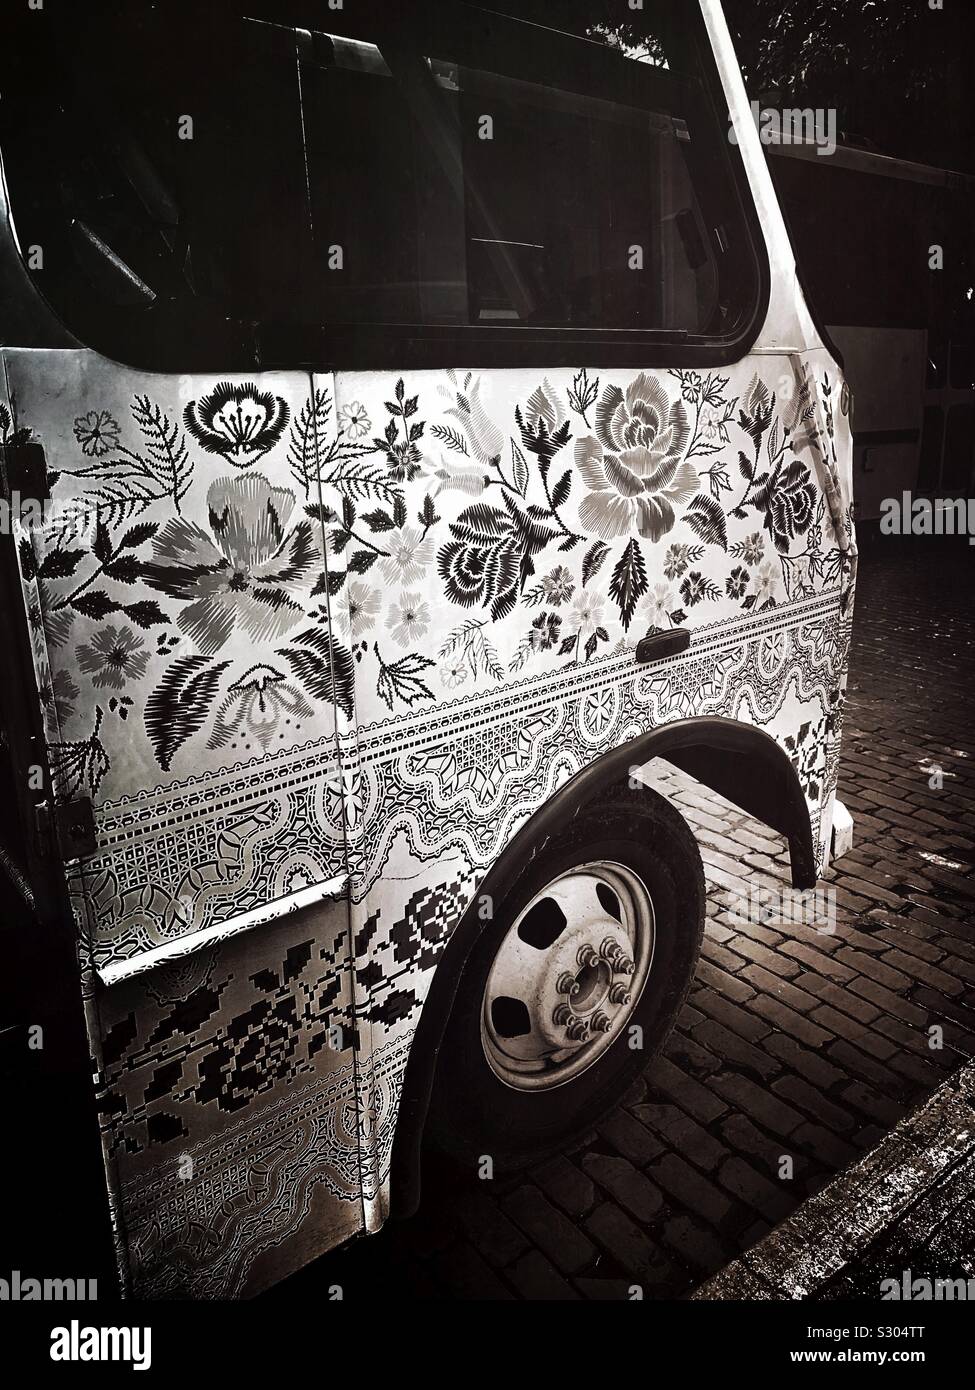 Black and white image of a tour bus painted to look like the local embroidered handicrafts Mérida is known for awaits tourists. Stock Photo